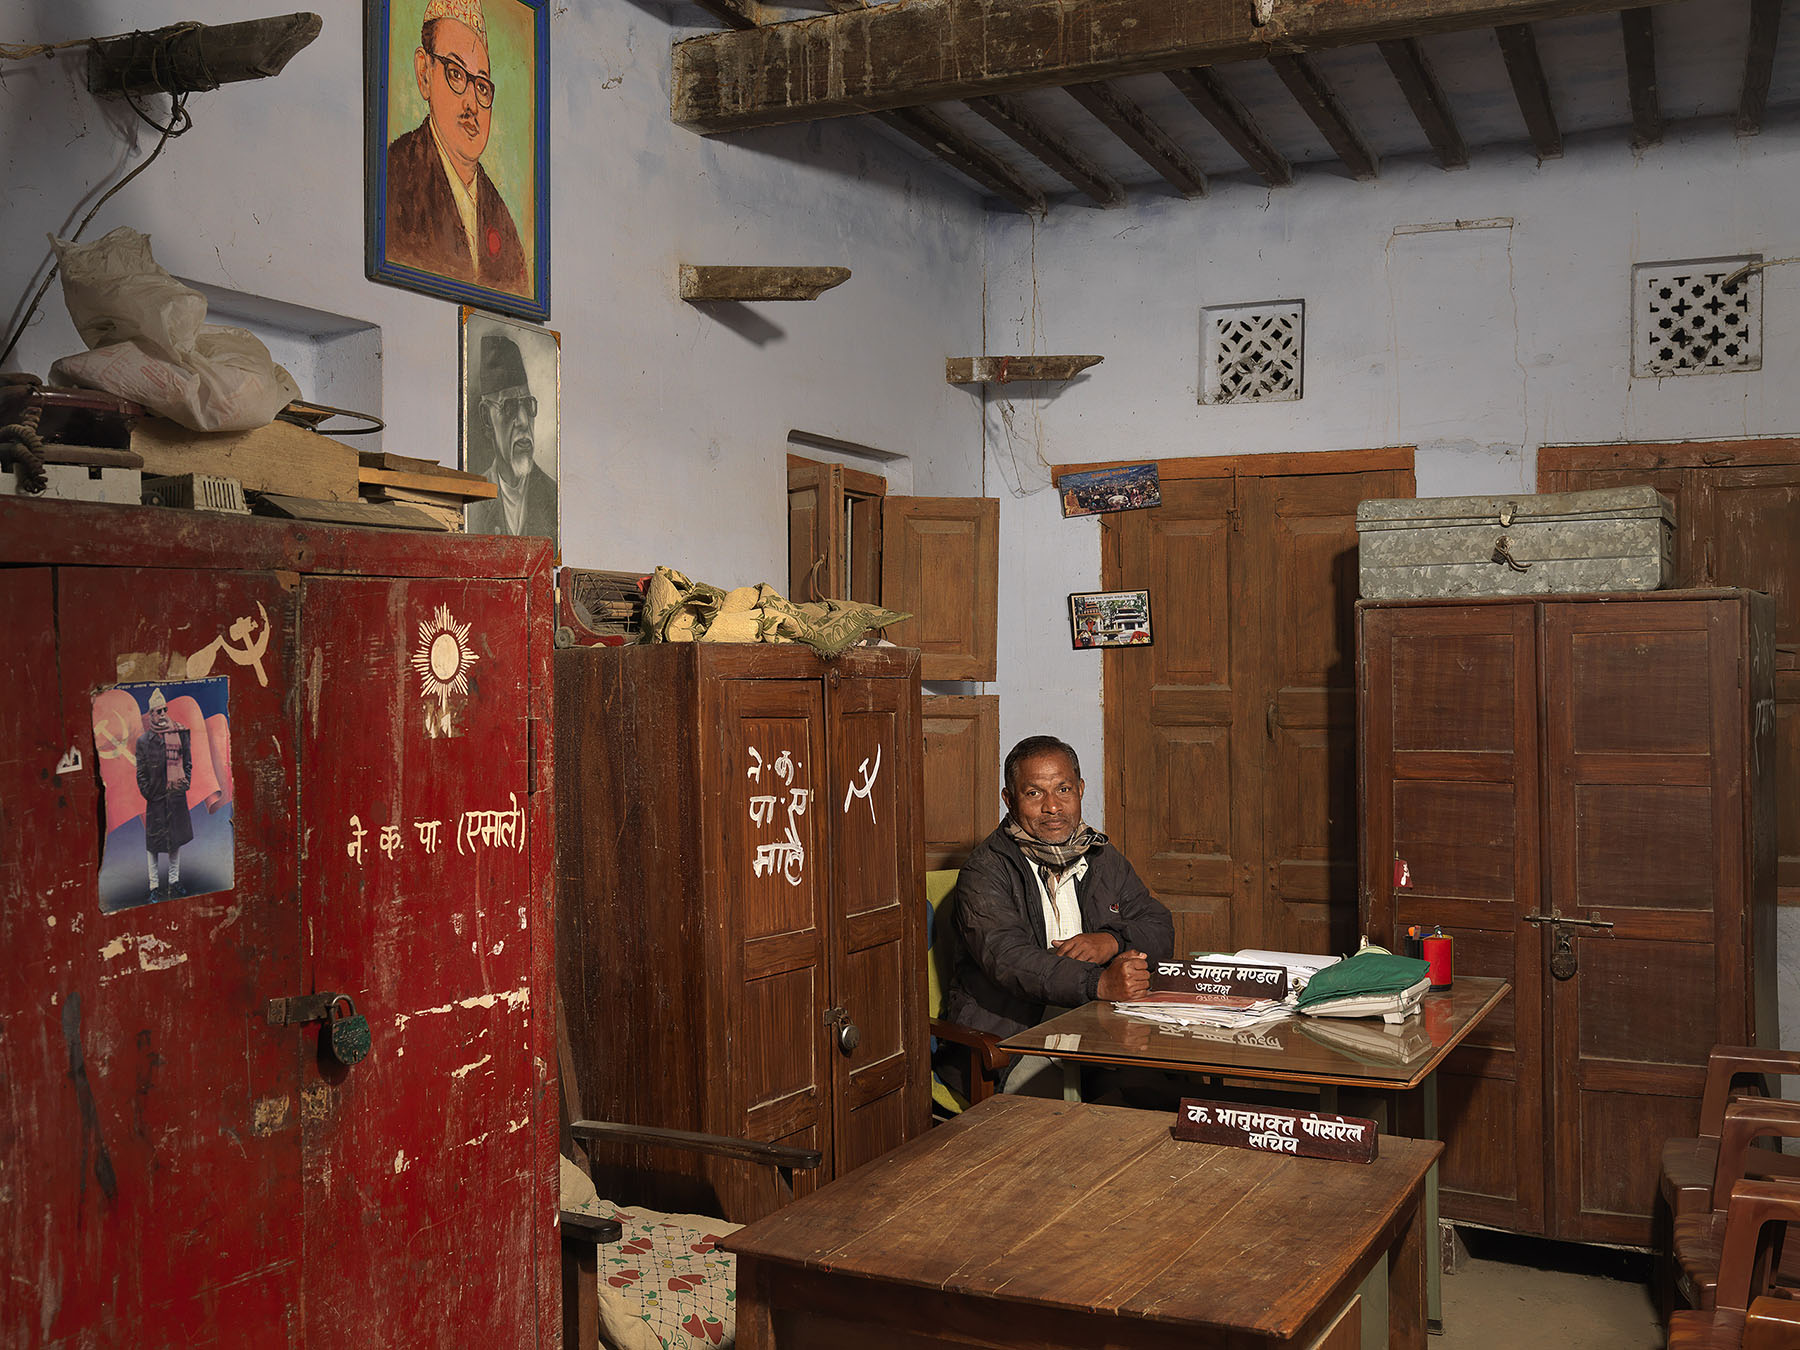 Nepal, communism. United Communist Party of Nepal (Maoist), aka UCPN (M): district committee office in Mahottari, Janakpur zone. Jamun Mandal, chairperson of the district committee.
The UCPN (M) came third in the 2013 Constituent Assembly elections, with 80 out of 575 elected seats.